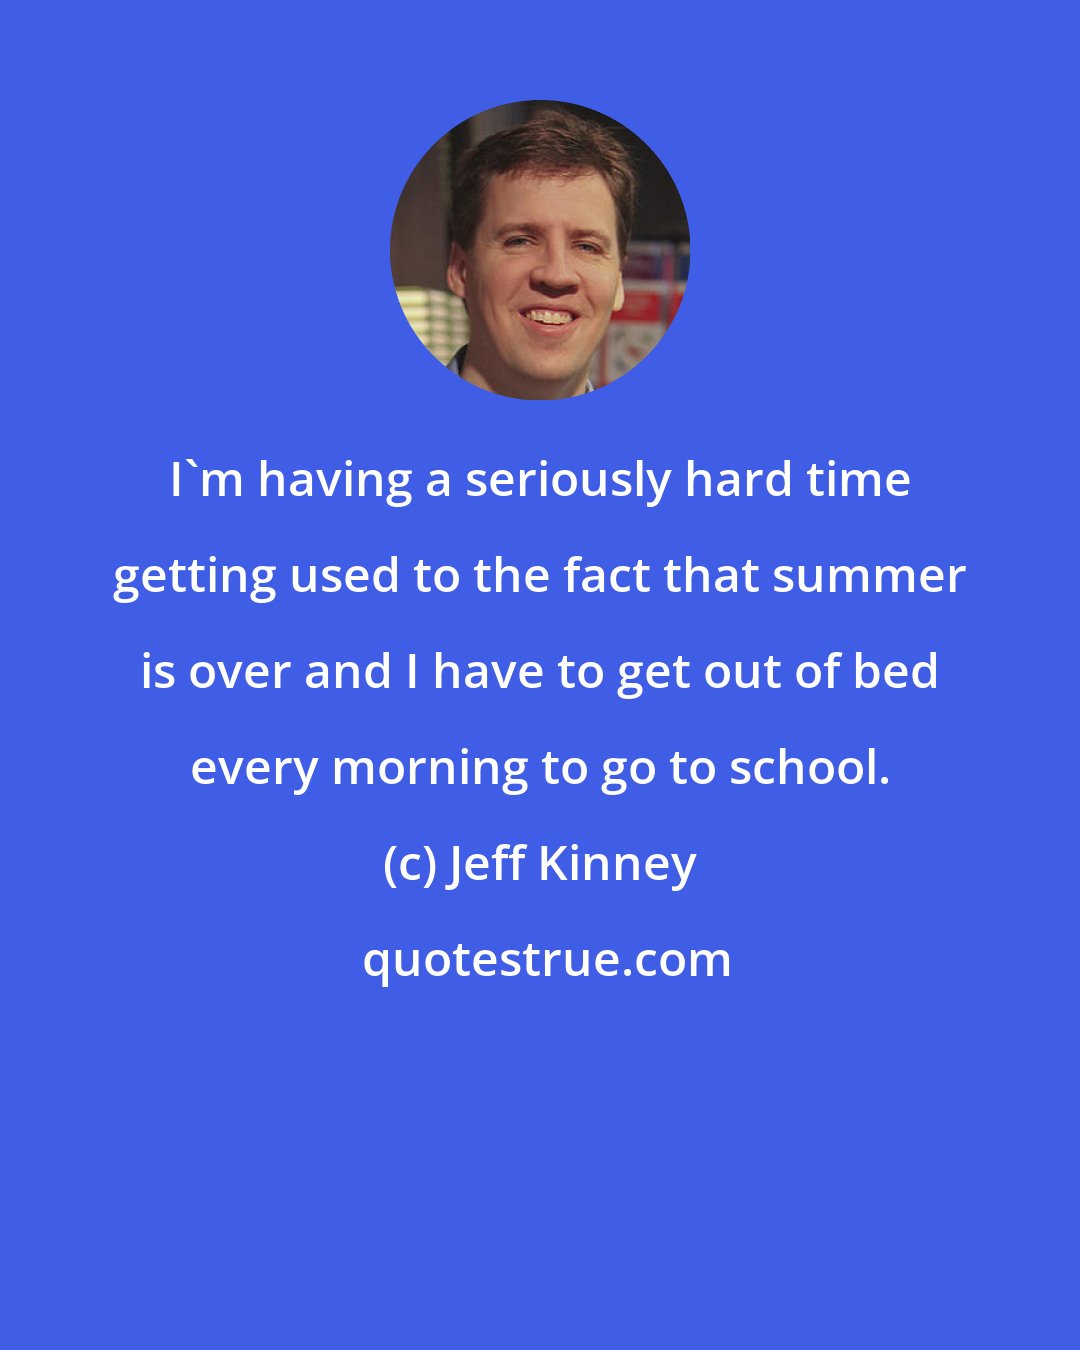 Jeff Kinney: I'm having a seriously hard time getting used to the fact that summer is over and I have to get out of bed every morning to go to school.